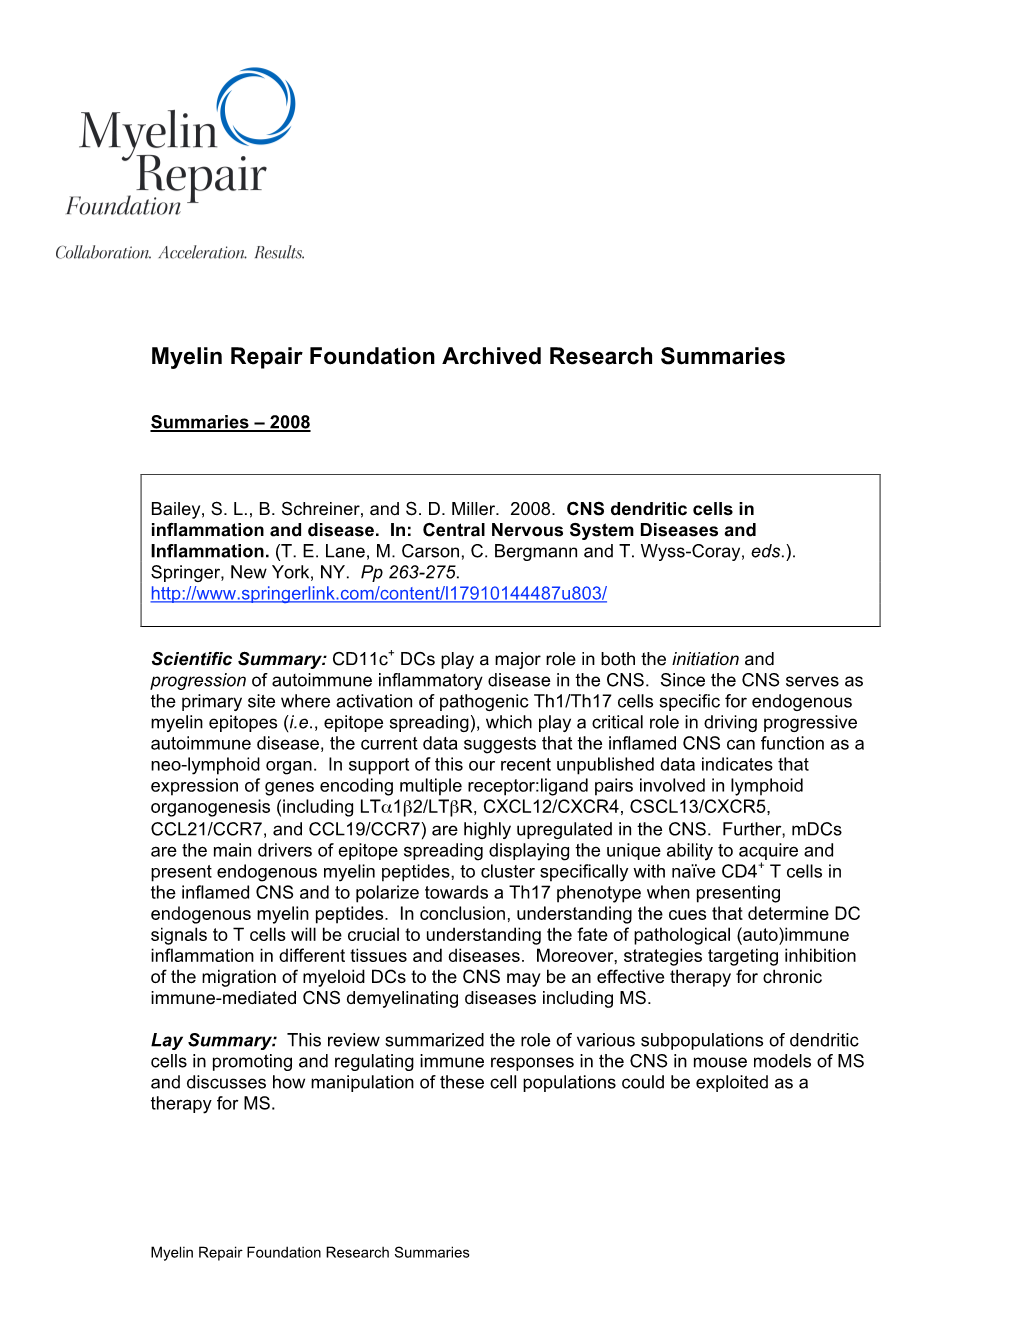 MRF Archive Compiled Research Summaries